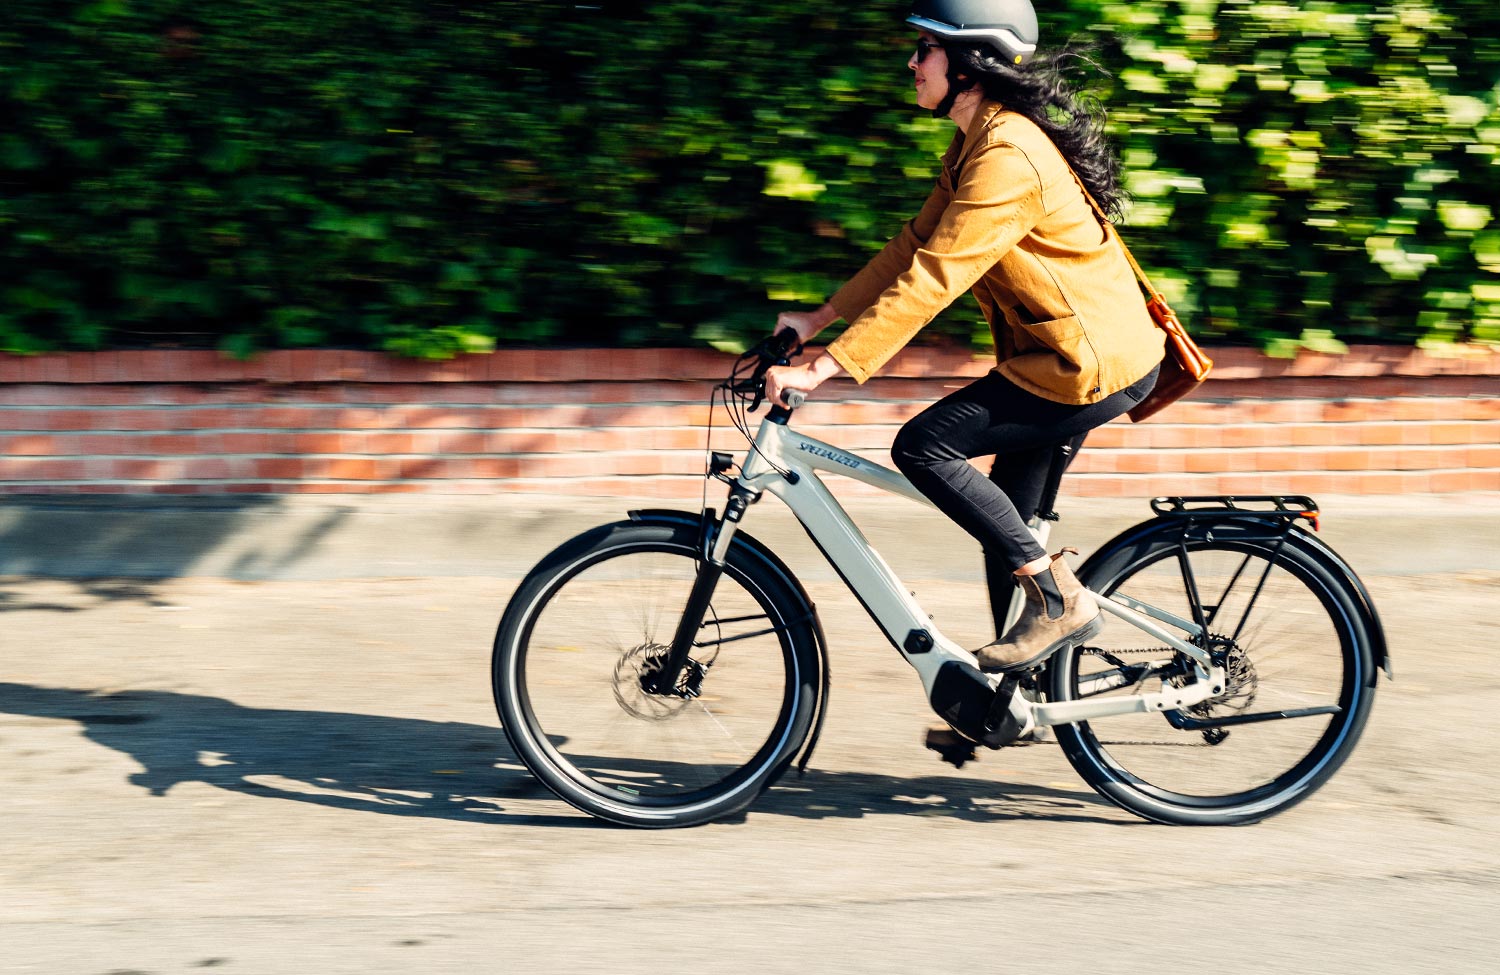 Completely updated: the new generation of Turbo Vado e-bikes from Specialized